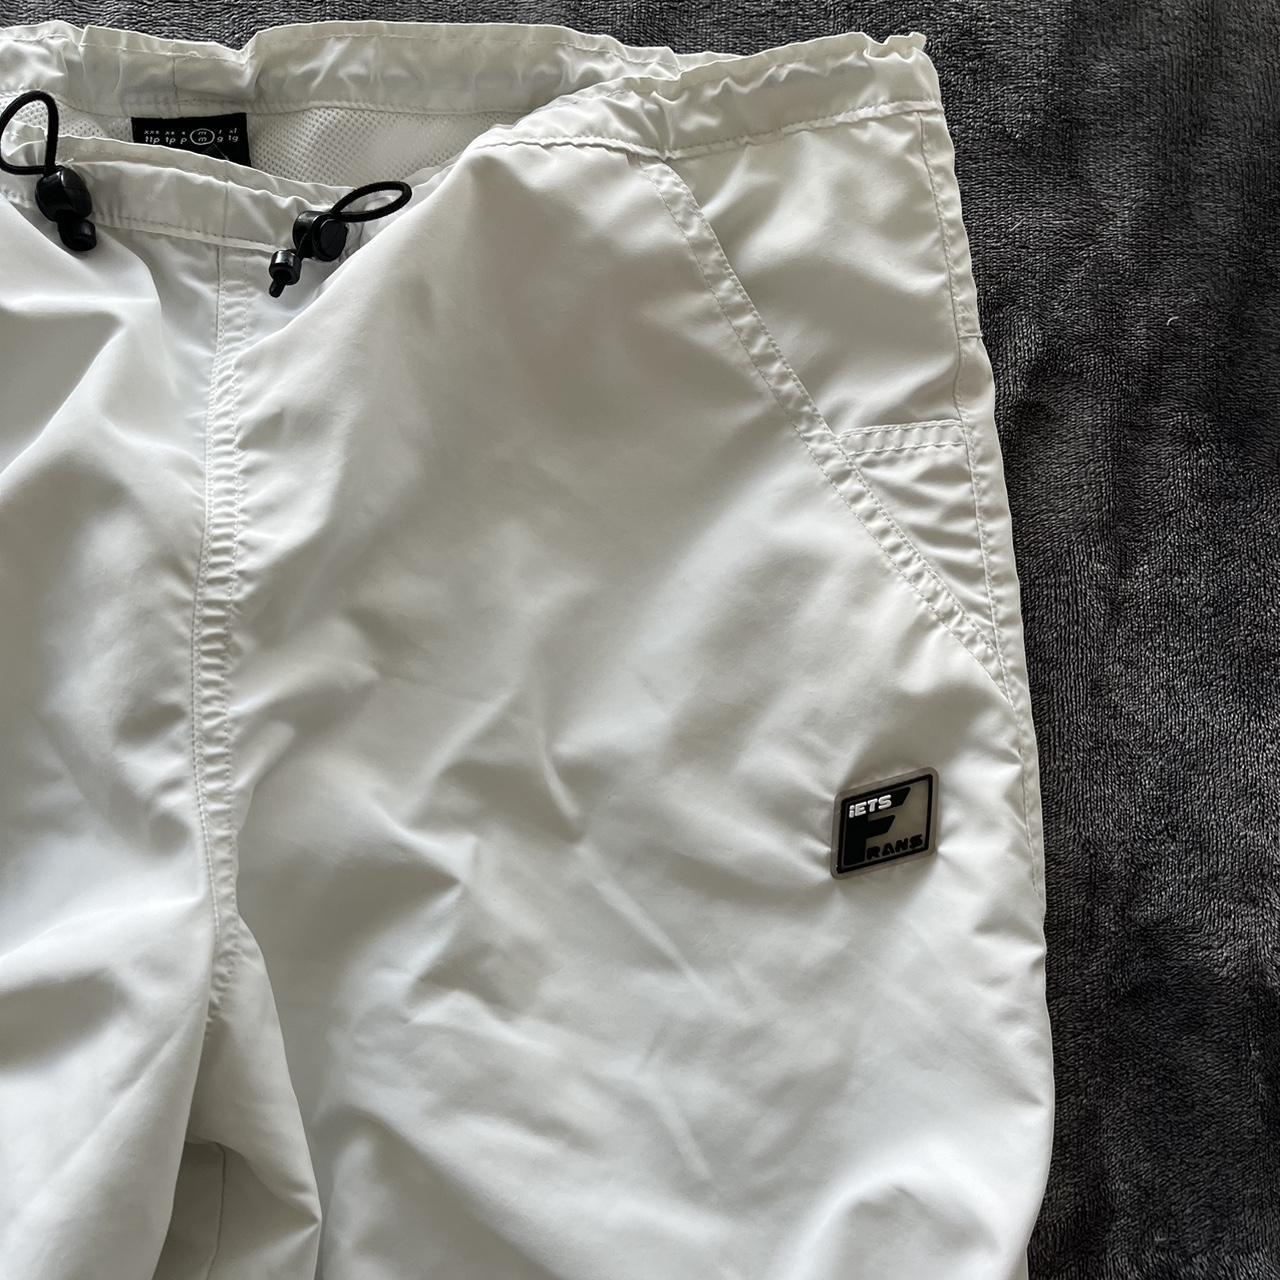 Iet frans urban outfitters white cargos Size M... - Depop